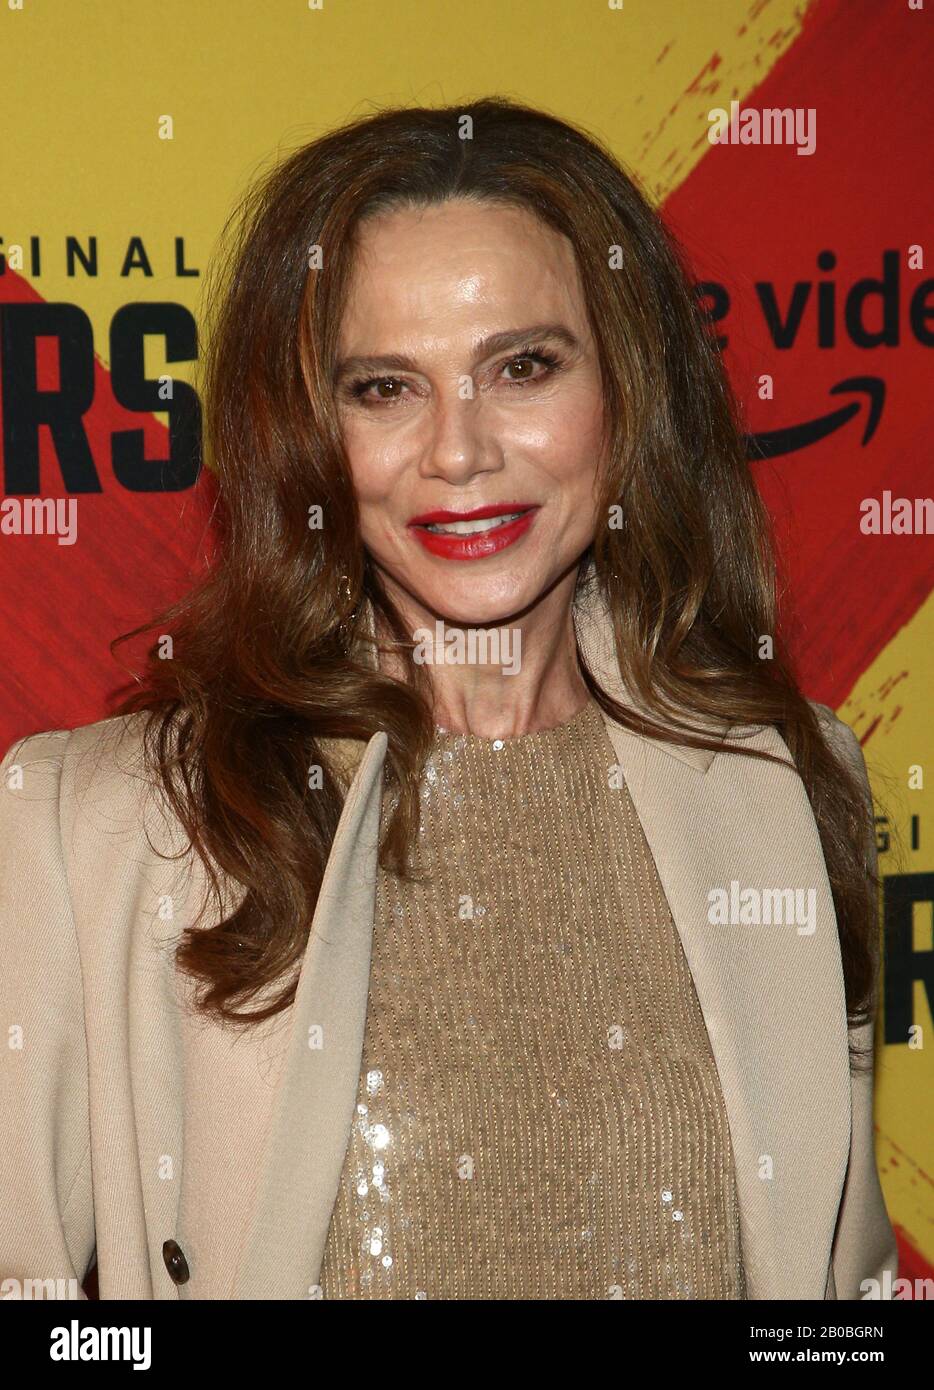 Los Angeles, Ca. 19th Feb, 2020. Lena Olin, at the world premiere of Hunters at the DGA Theatre Complex in Los Angeles, California on February 19, 2020. Credit: Faye Sadou/Media Punch/Alamy Live News Stock Photo